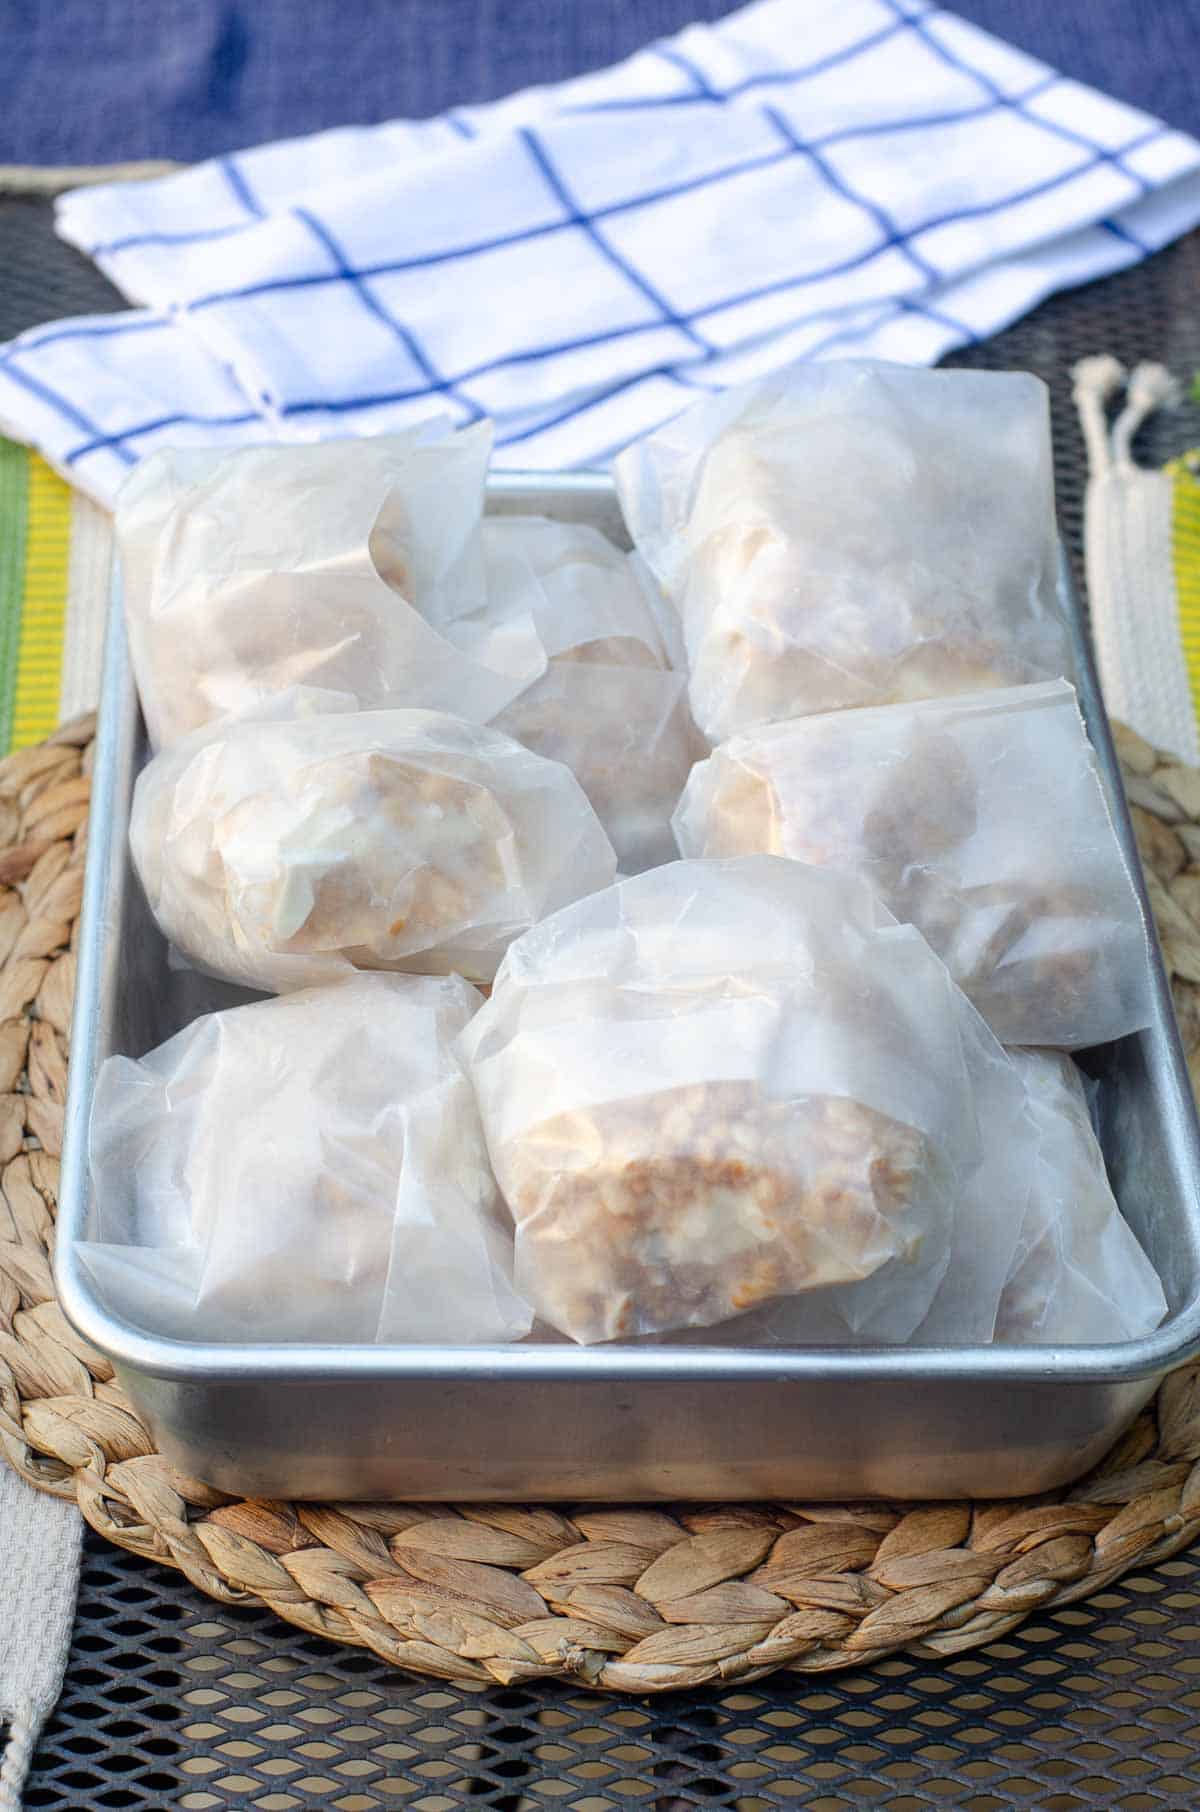 Rice Krispie ice cream sandwiches wrapped in wax paper and in a large metal pan.